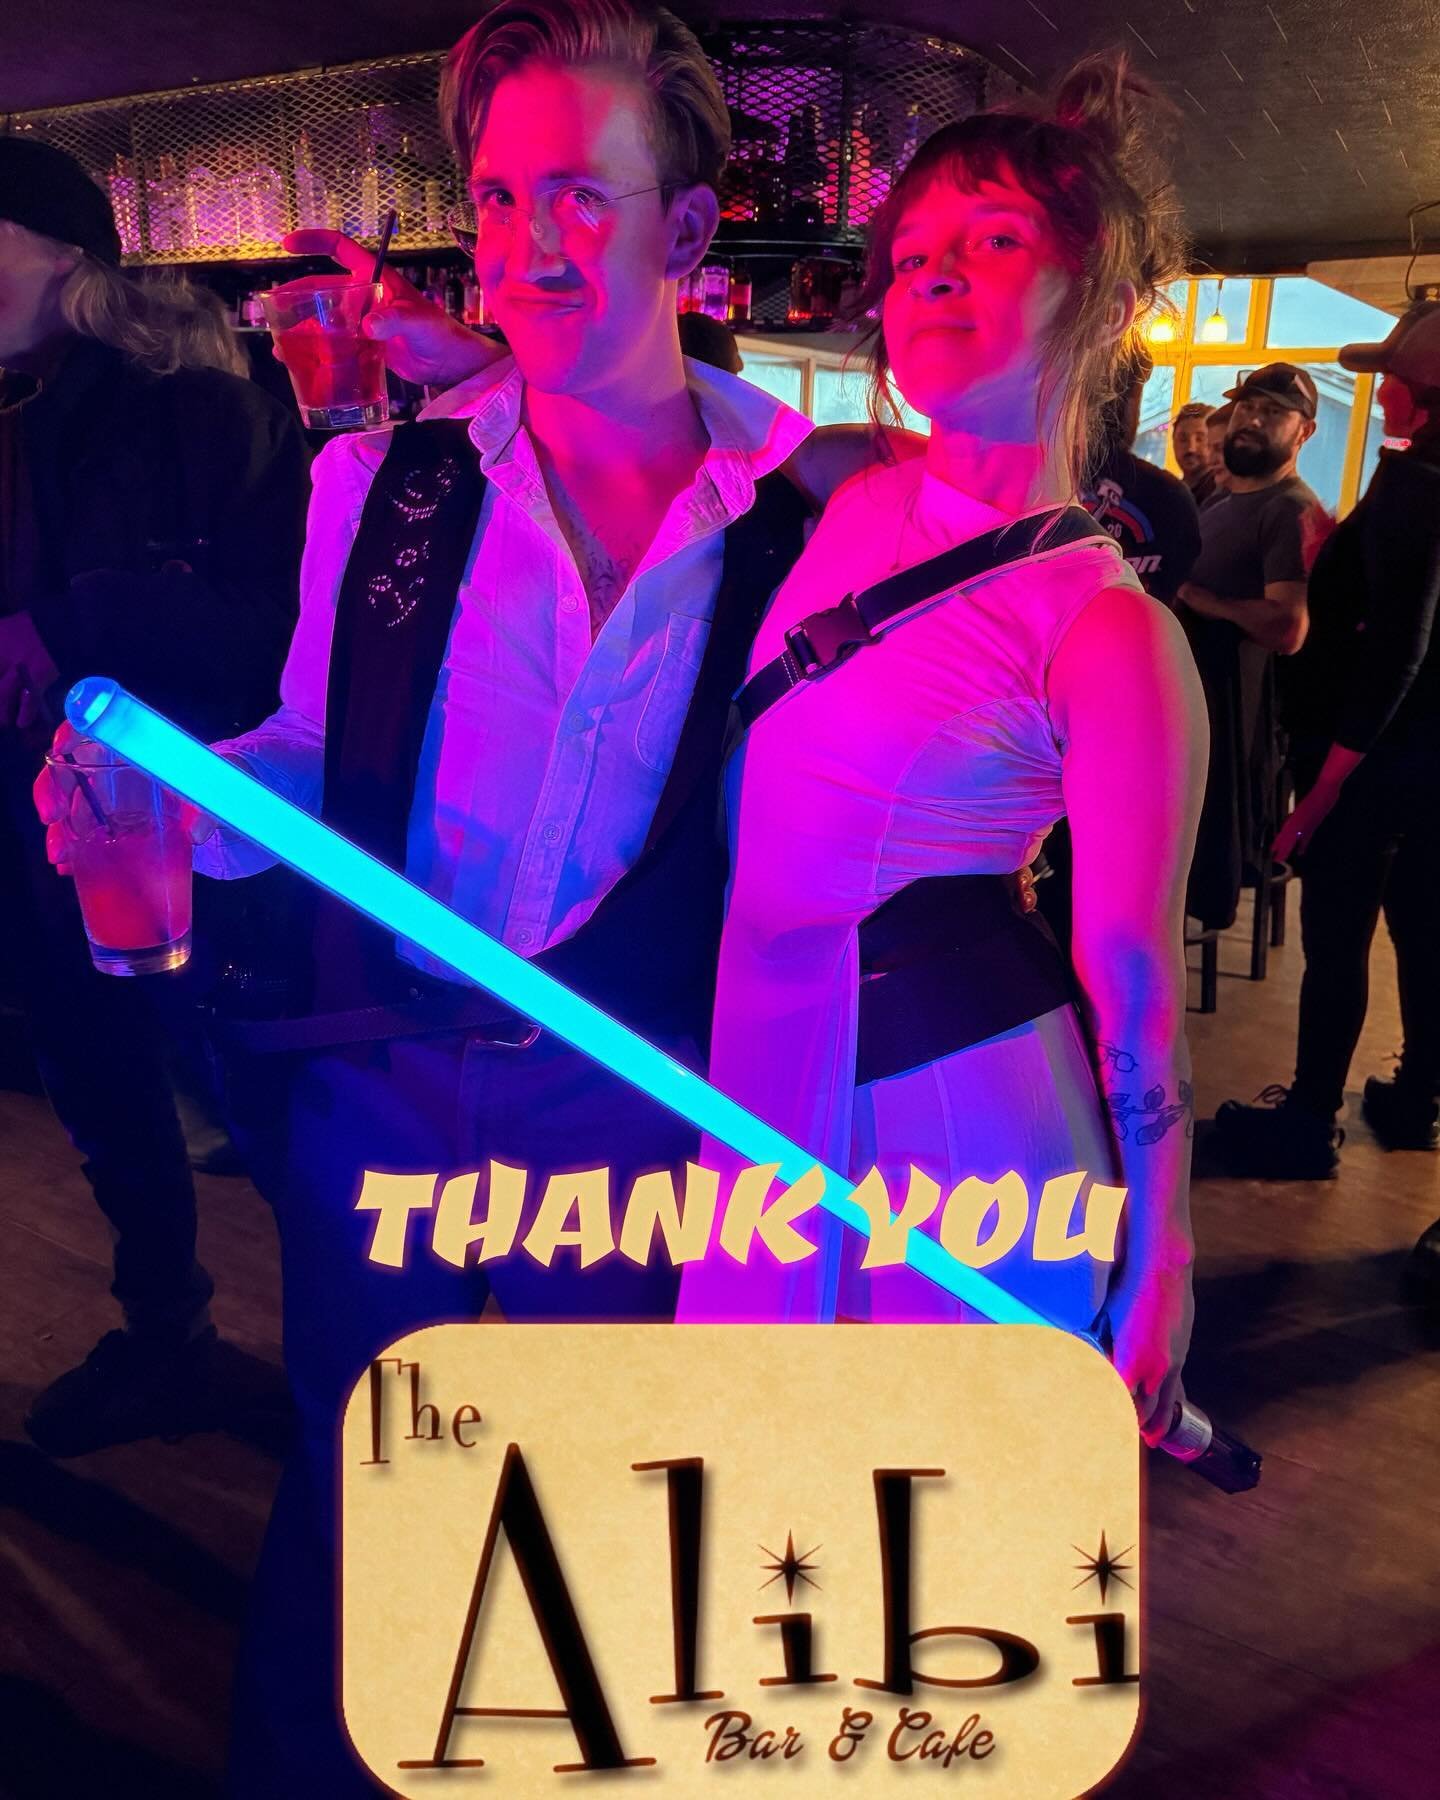 Thank you to @the_alibi_homerak  for hosting our May the Farce be with You fundraiser! We had a really great time. ❤️

#theatre #communitytheatre #pieronetheatre #karaoke #showtunes #musicaltheatre